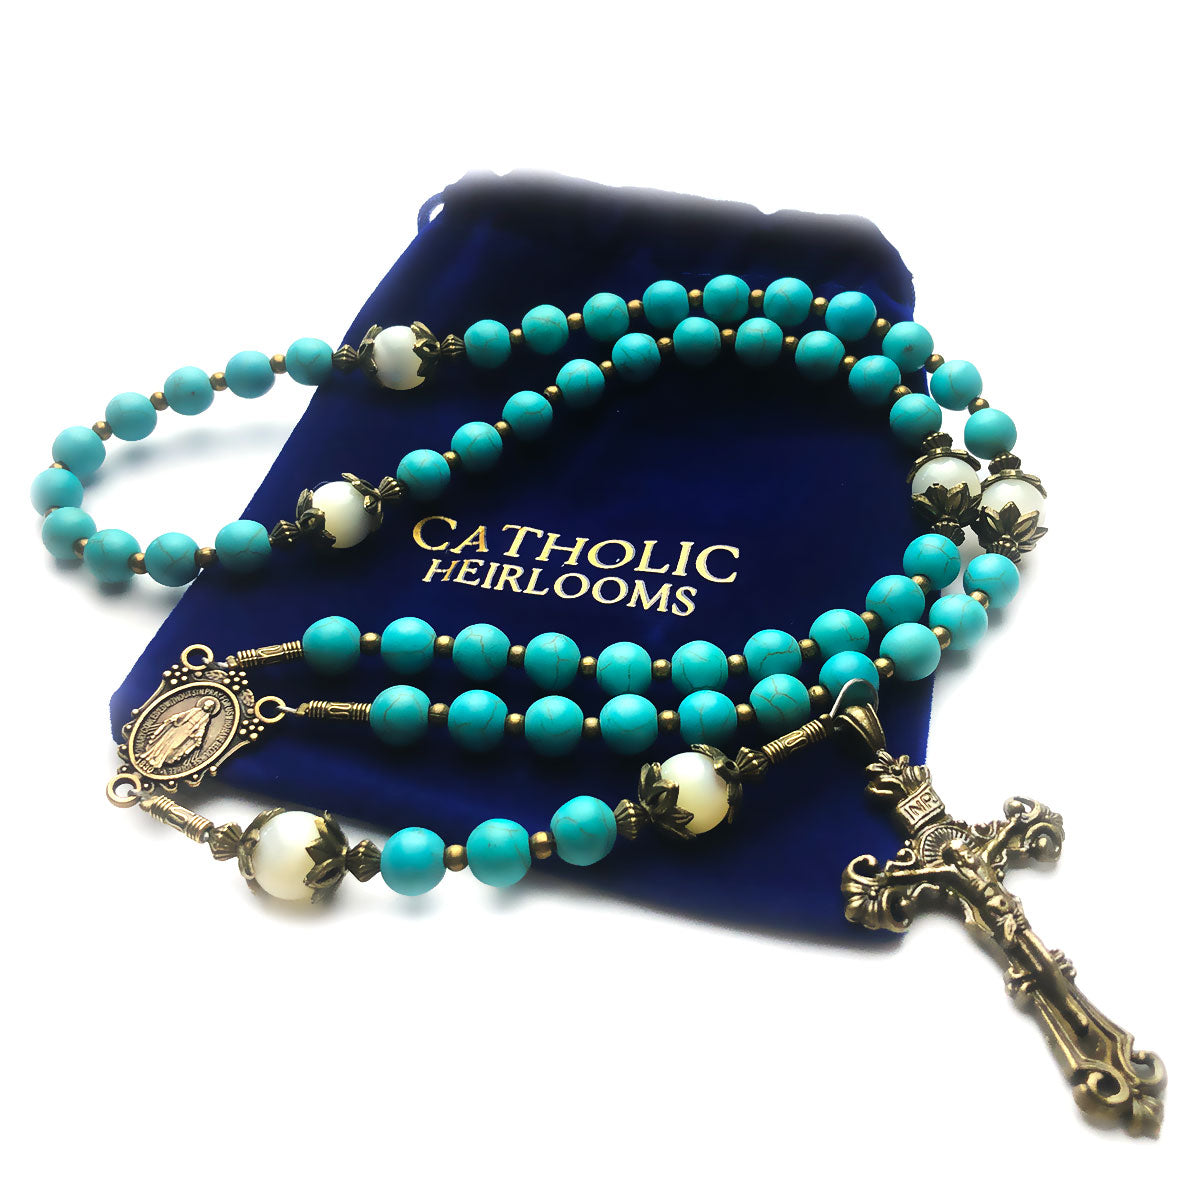 Turquoise and Mother of Pearl Stone Rosary With Miraculous Medal by Catholic Heirlooms - Confirmation - Holy Communion Gift - Rosary Necklace